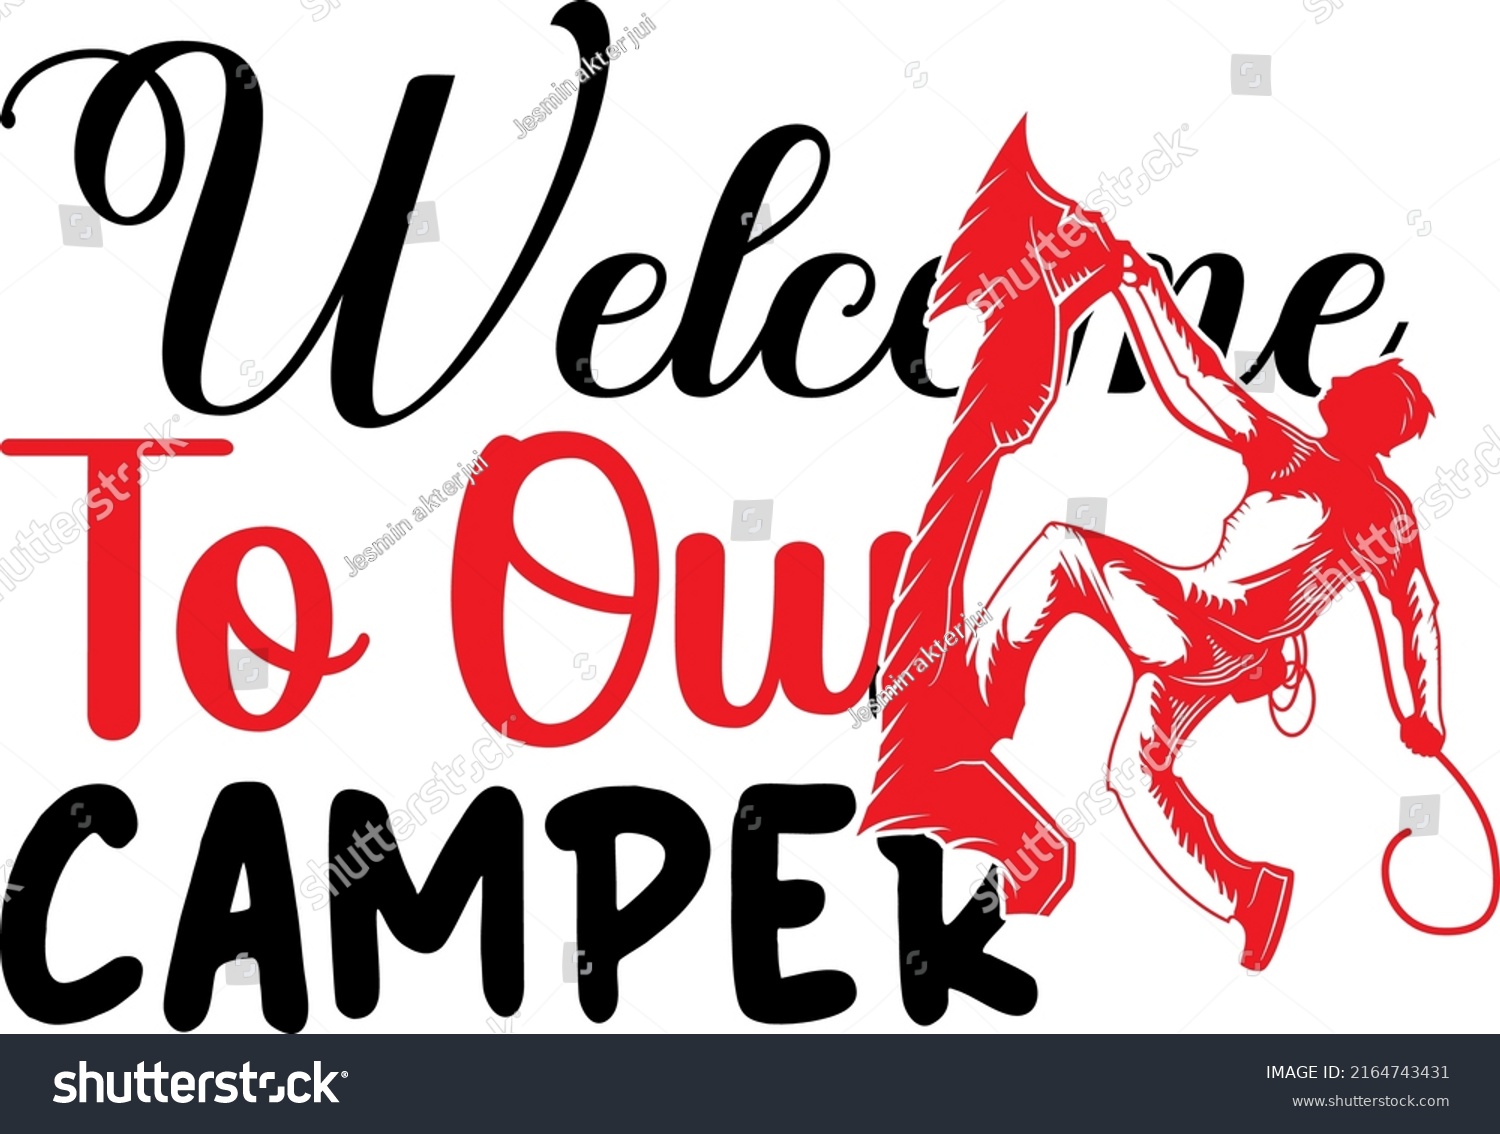 SVG of Welcome to our camper. - Camping SVG graphics design svg